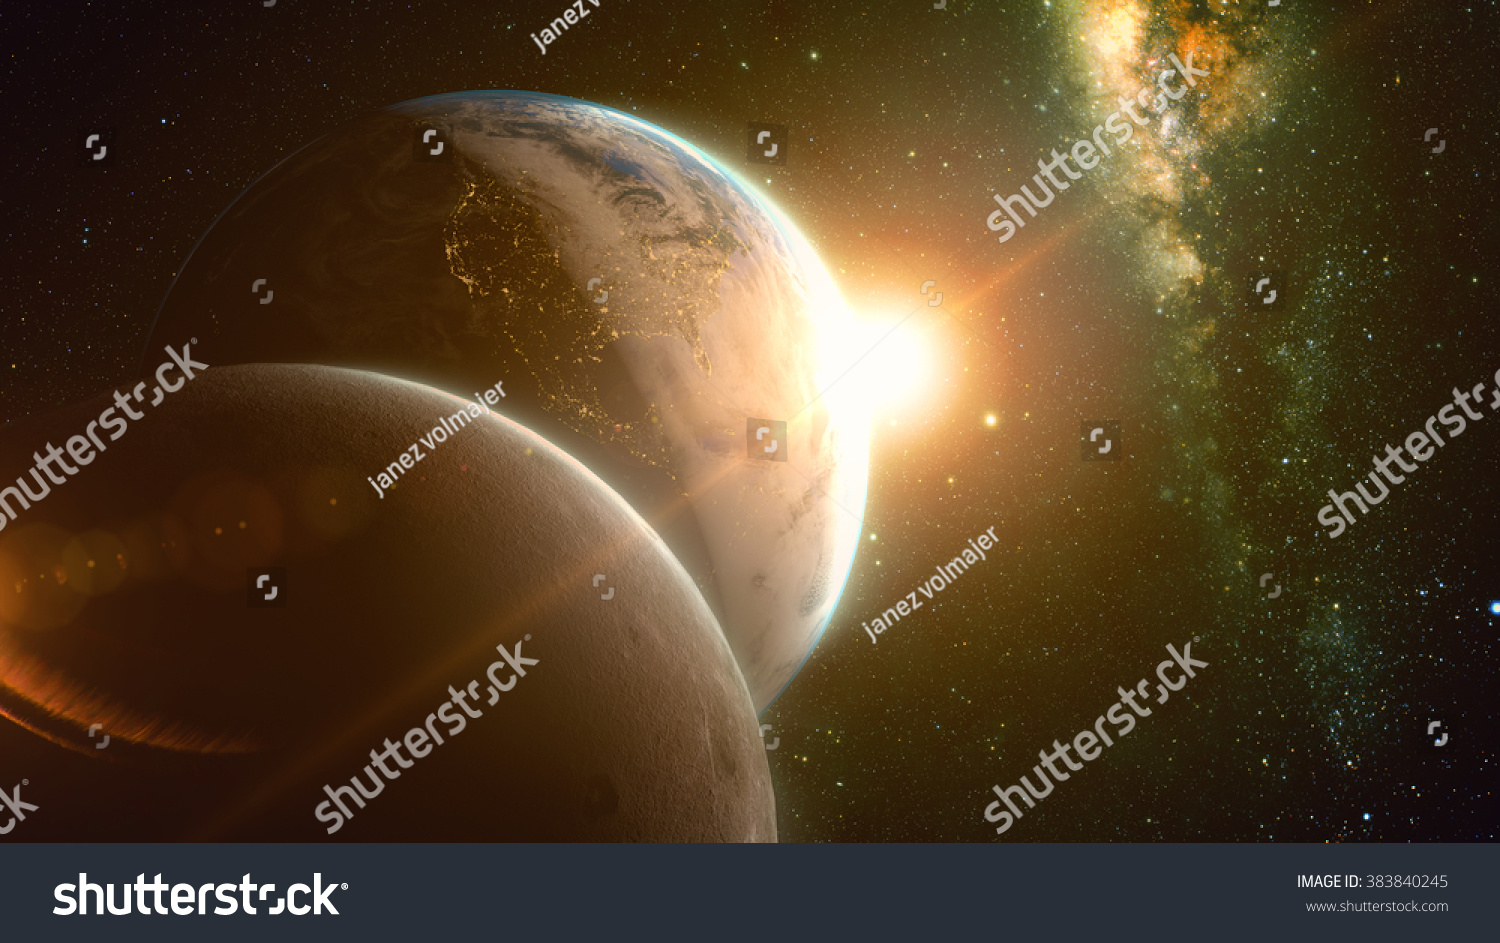 spectacular sunrise view over Planet Earth and moon with milkyway in background.
Elements of this image furnished by NASA #383840245